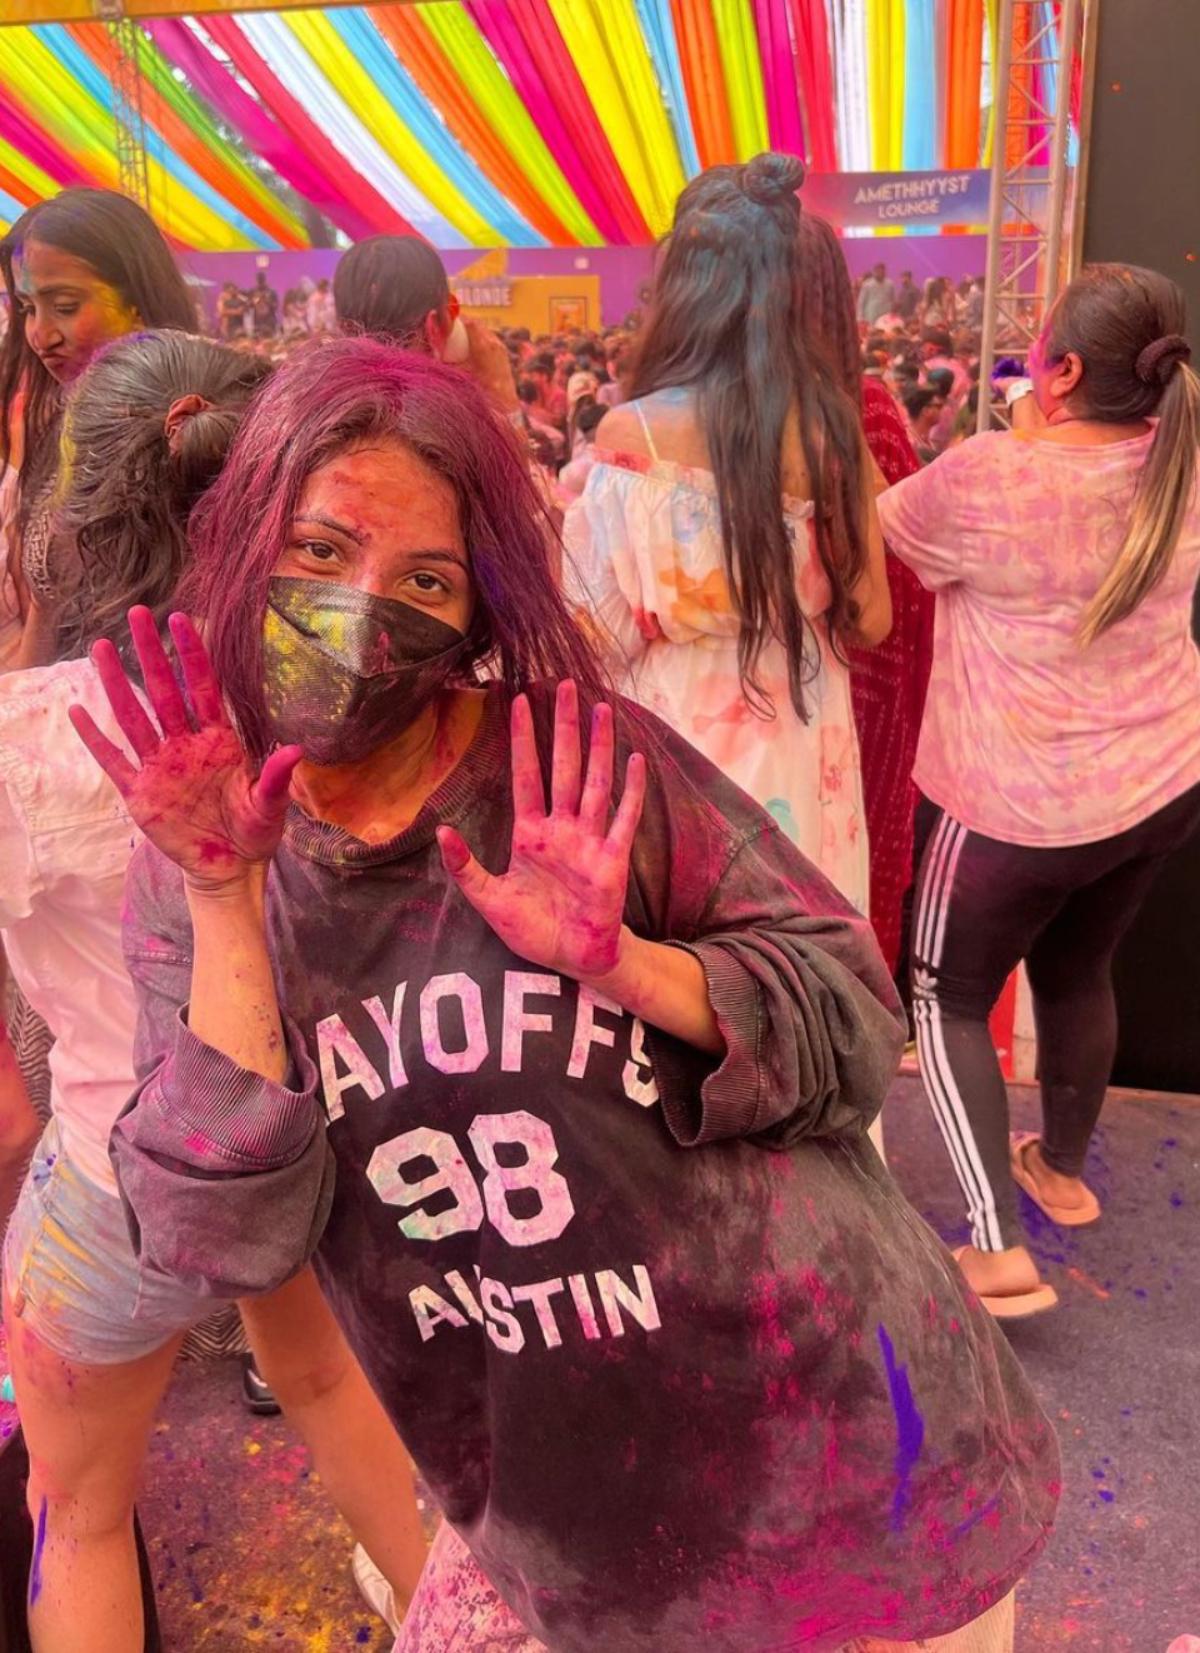 'Bigg Boss 13' fame, Shehnaaz Gill unleashed her goofy side as she ringed into Holi celebrations with her close friends at Ankita Lokhande's Holi bash. On Tuesday, Shehnaaz took to Instagram to drop a string of funny photos of her striking hilarious poses while being soaked up in various colours from head to toe. 